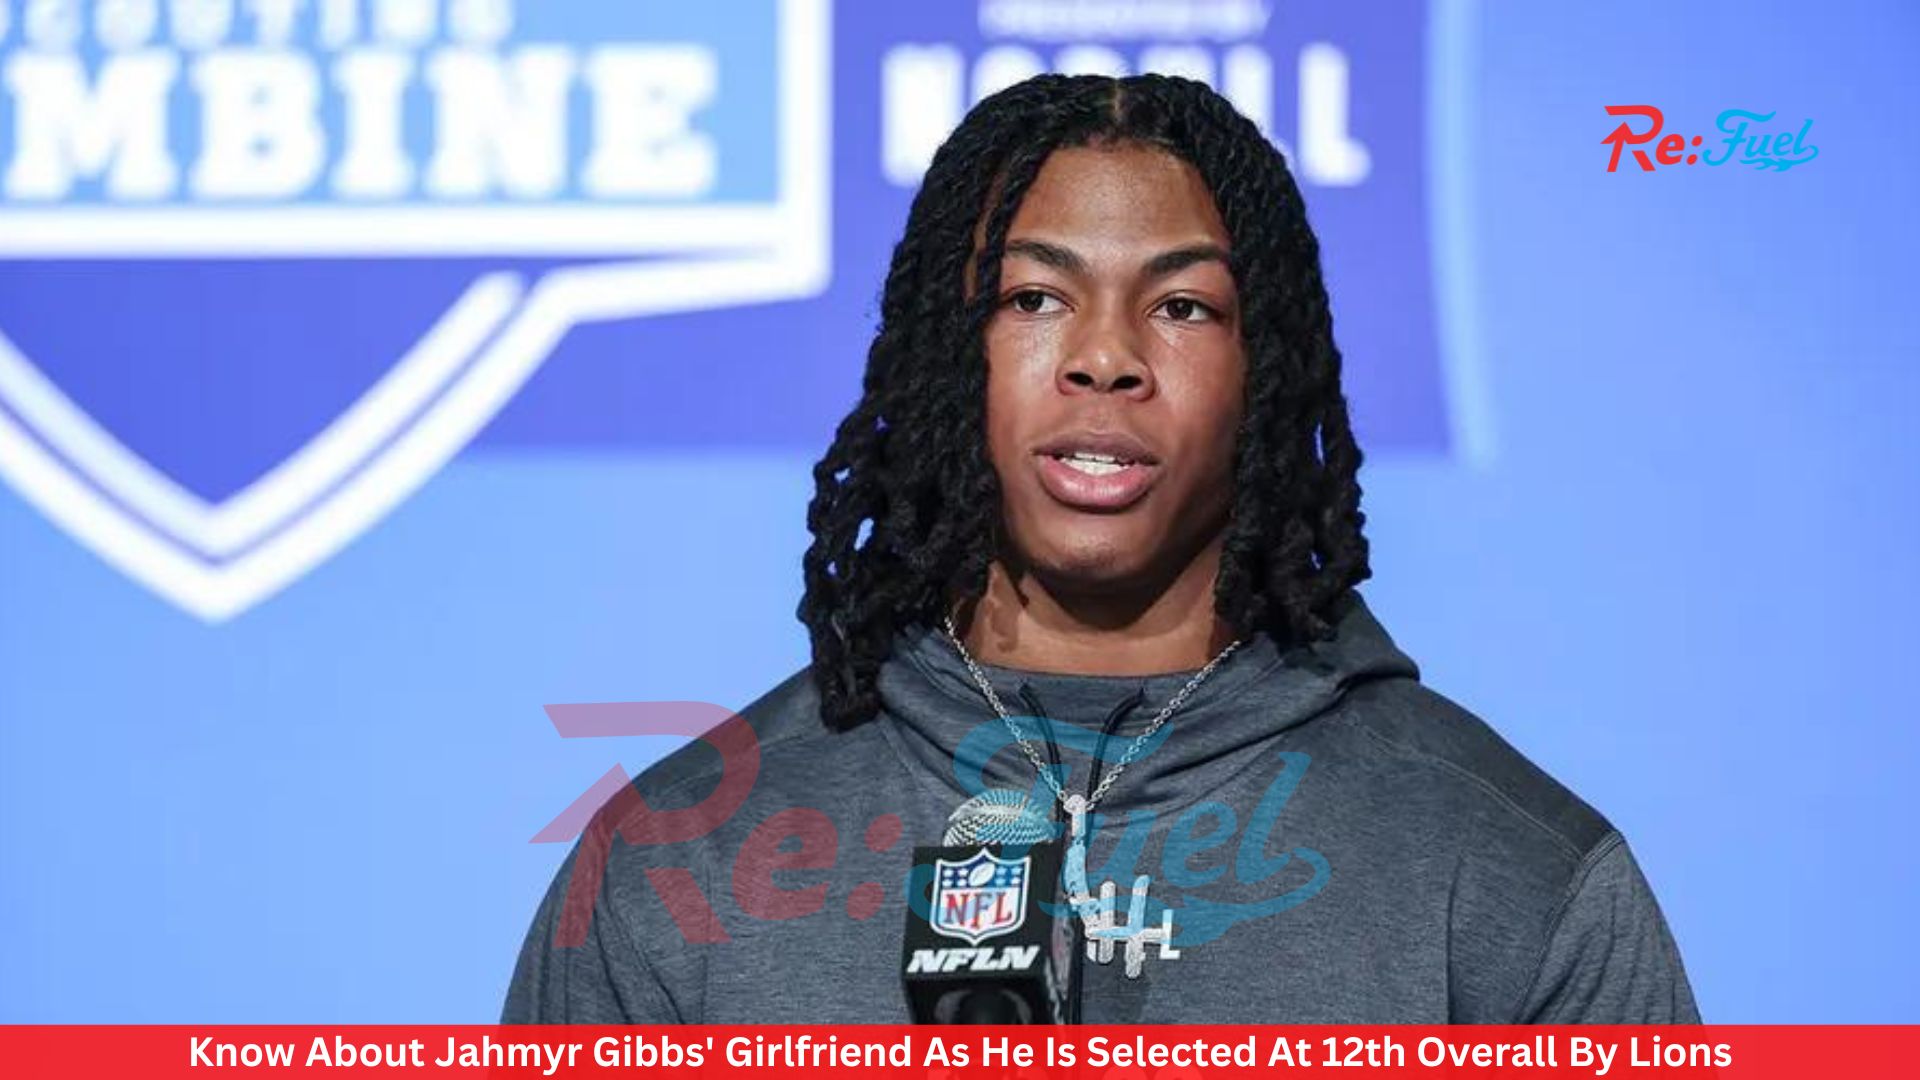 Know About Jahmyr Gibbs' Girlfriend As He Is Selected At 12th Overall By Lions